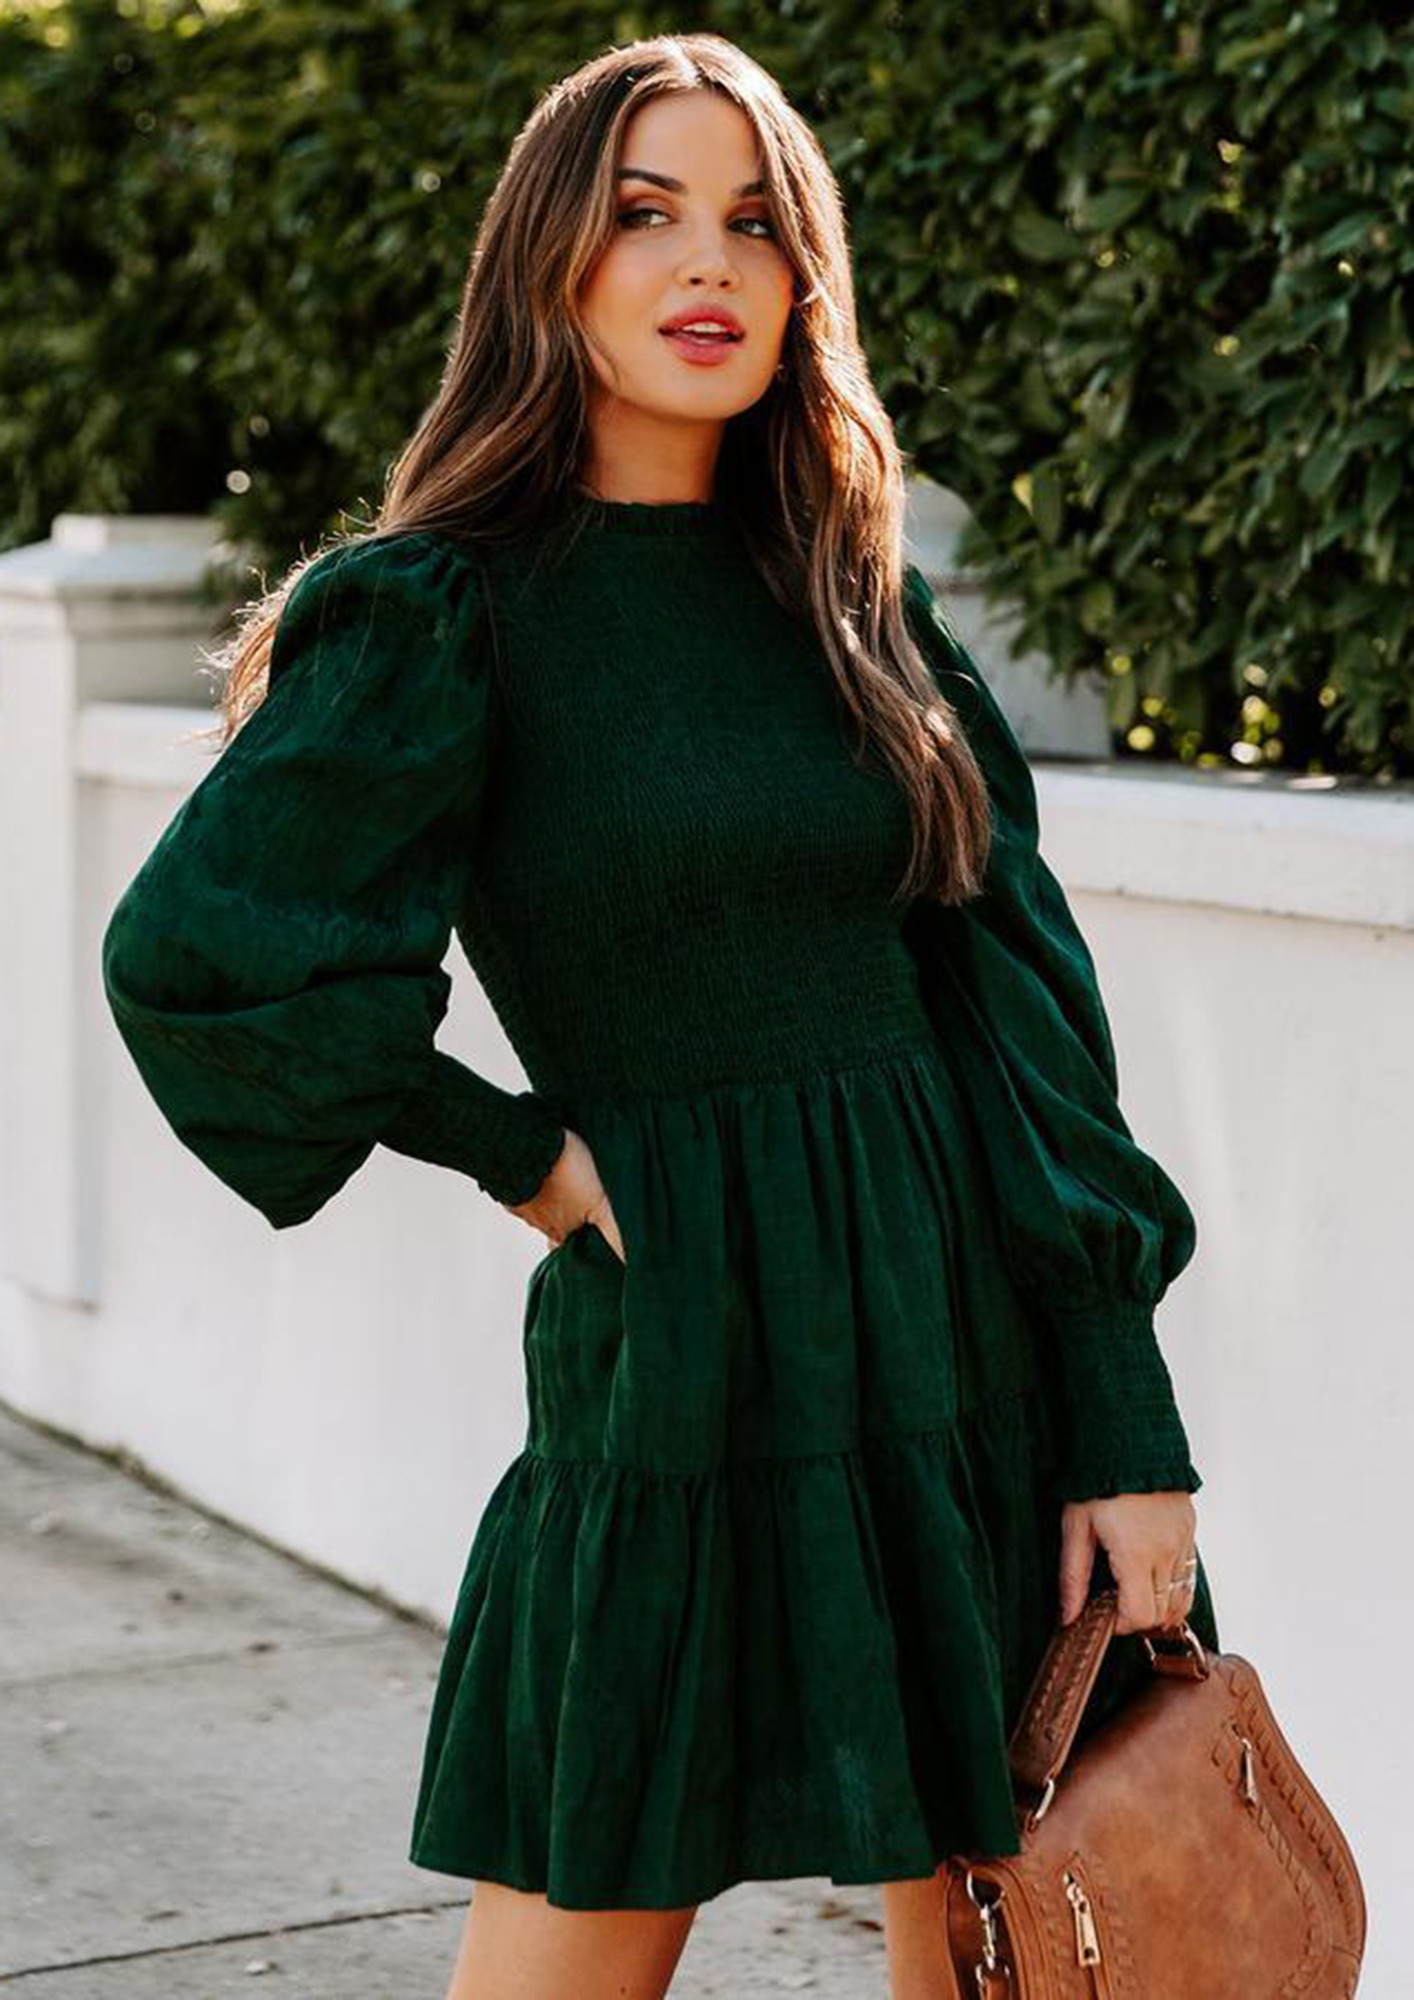 Bottle Green Outfit